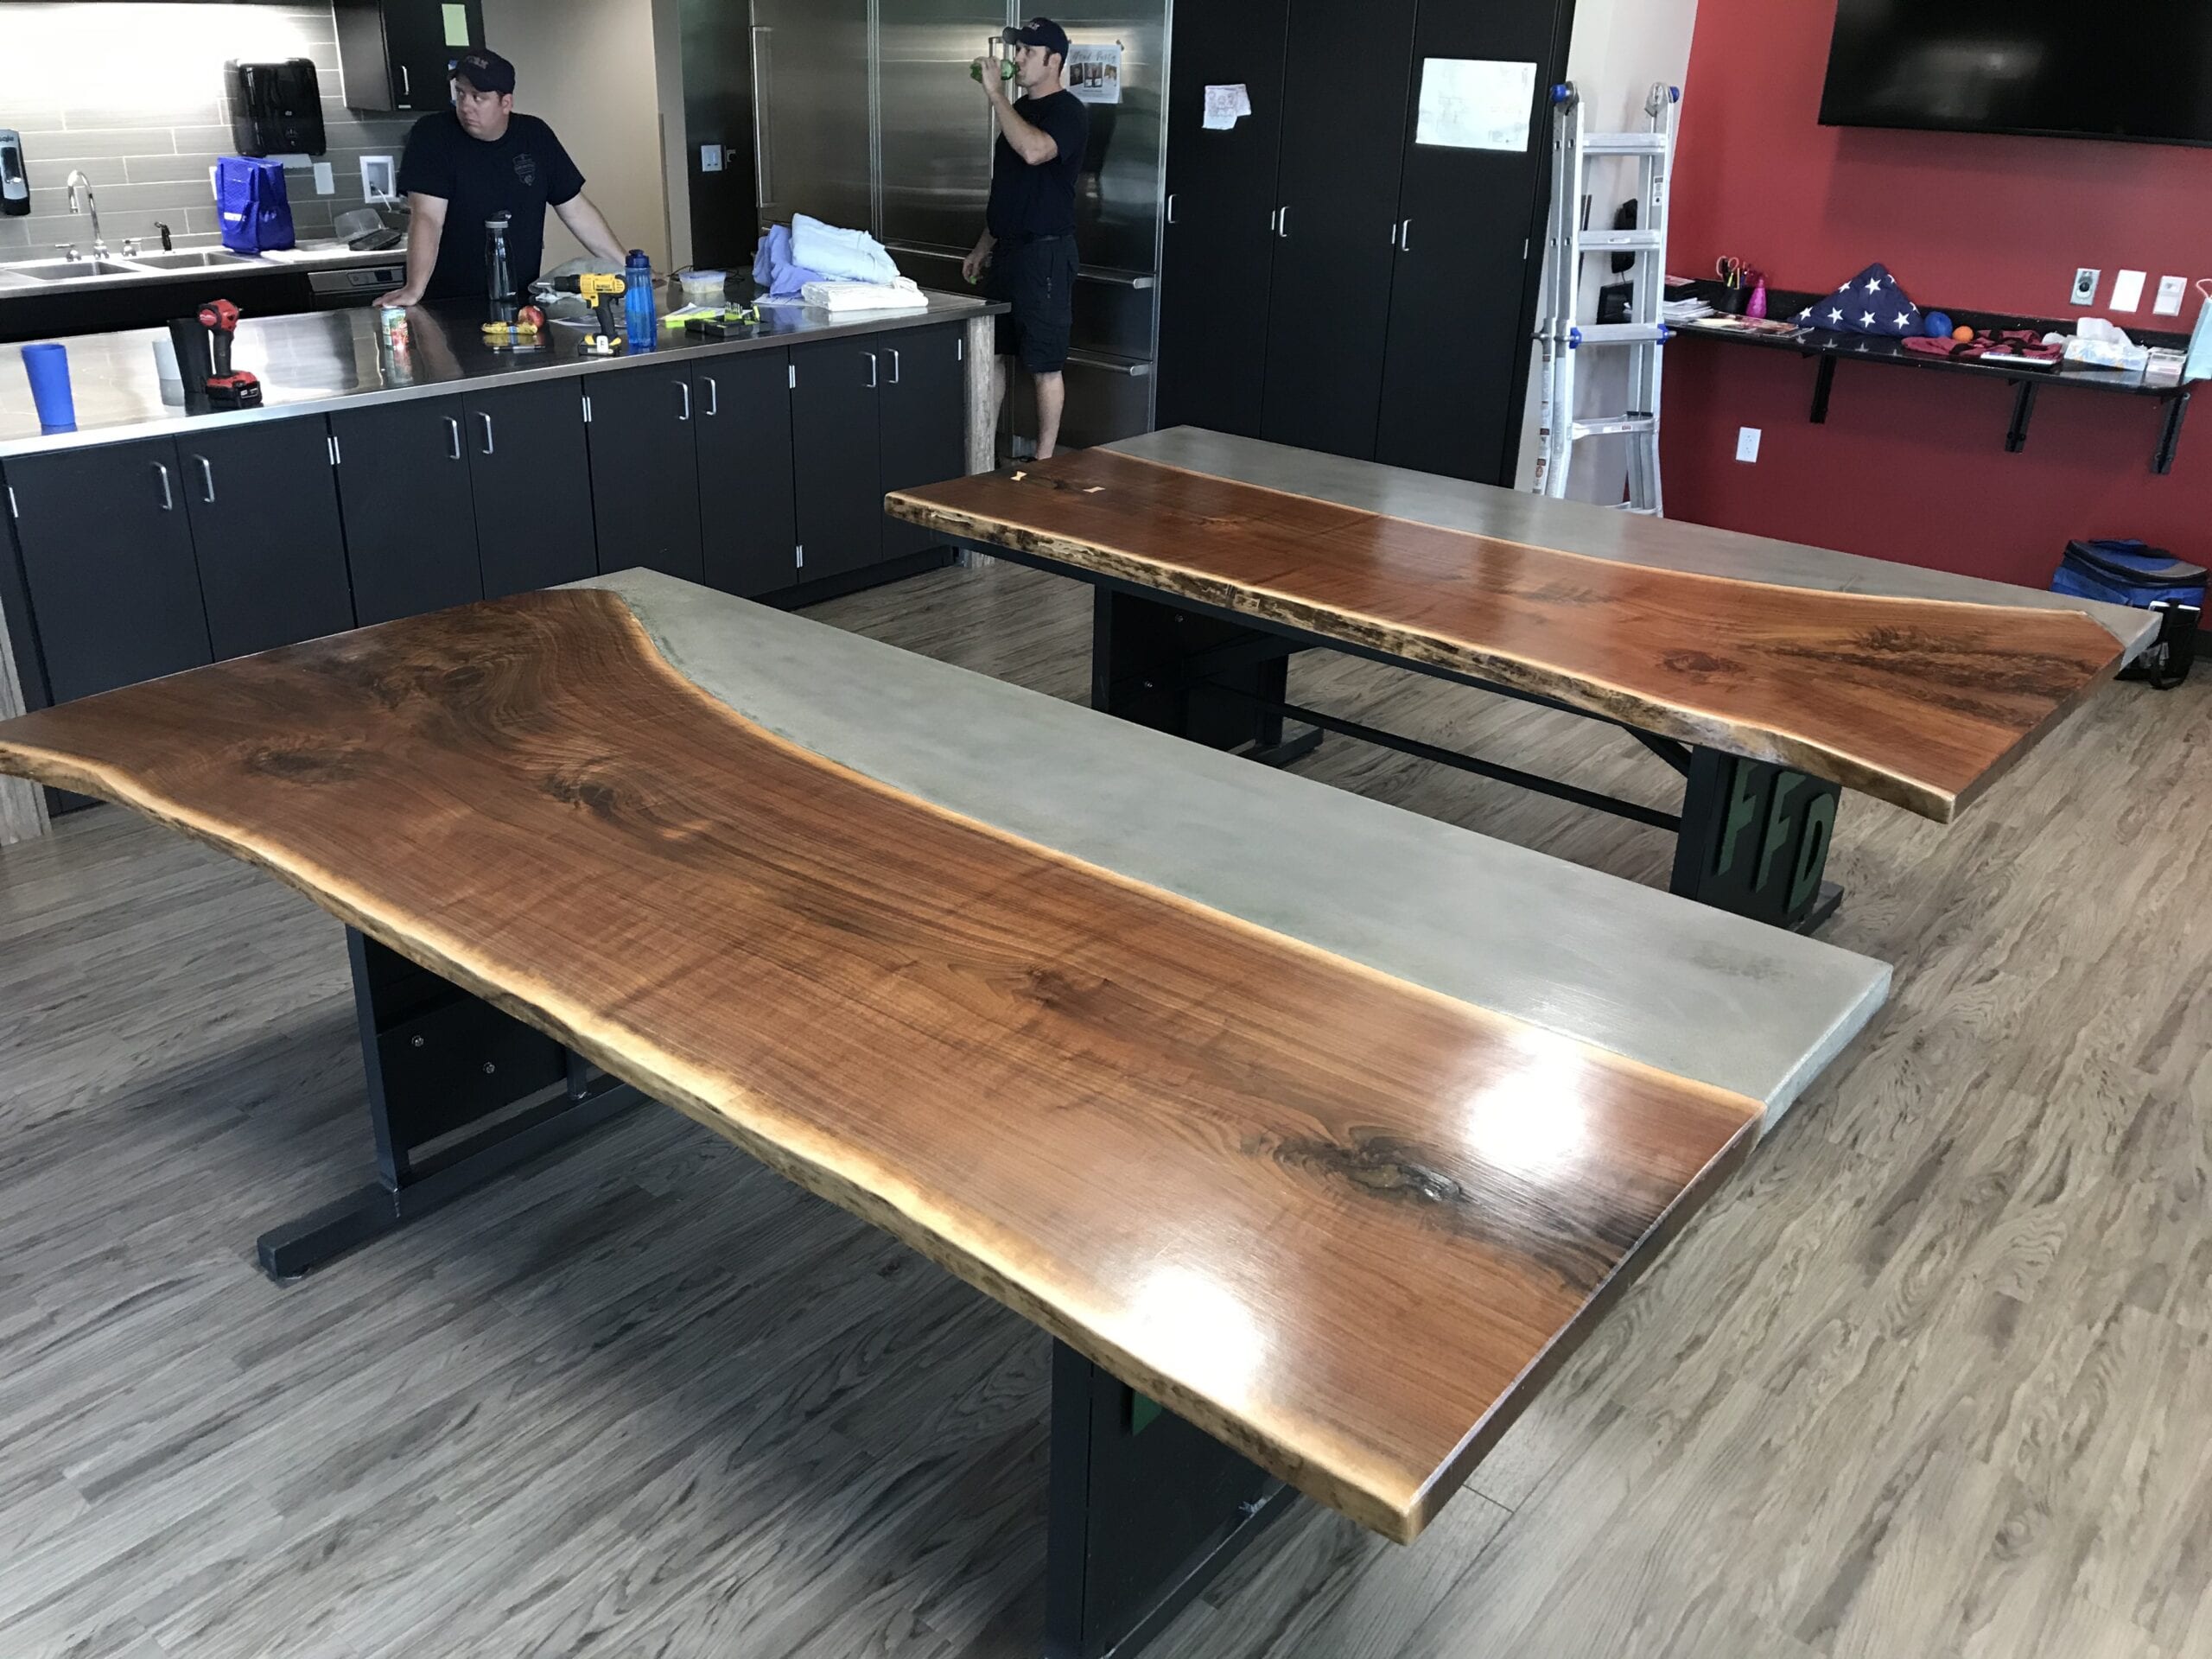 Charcoal Dye stained concrete and reclaimed wood dining table